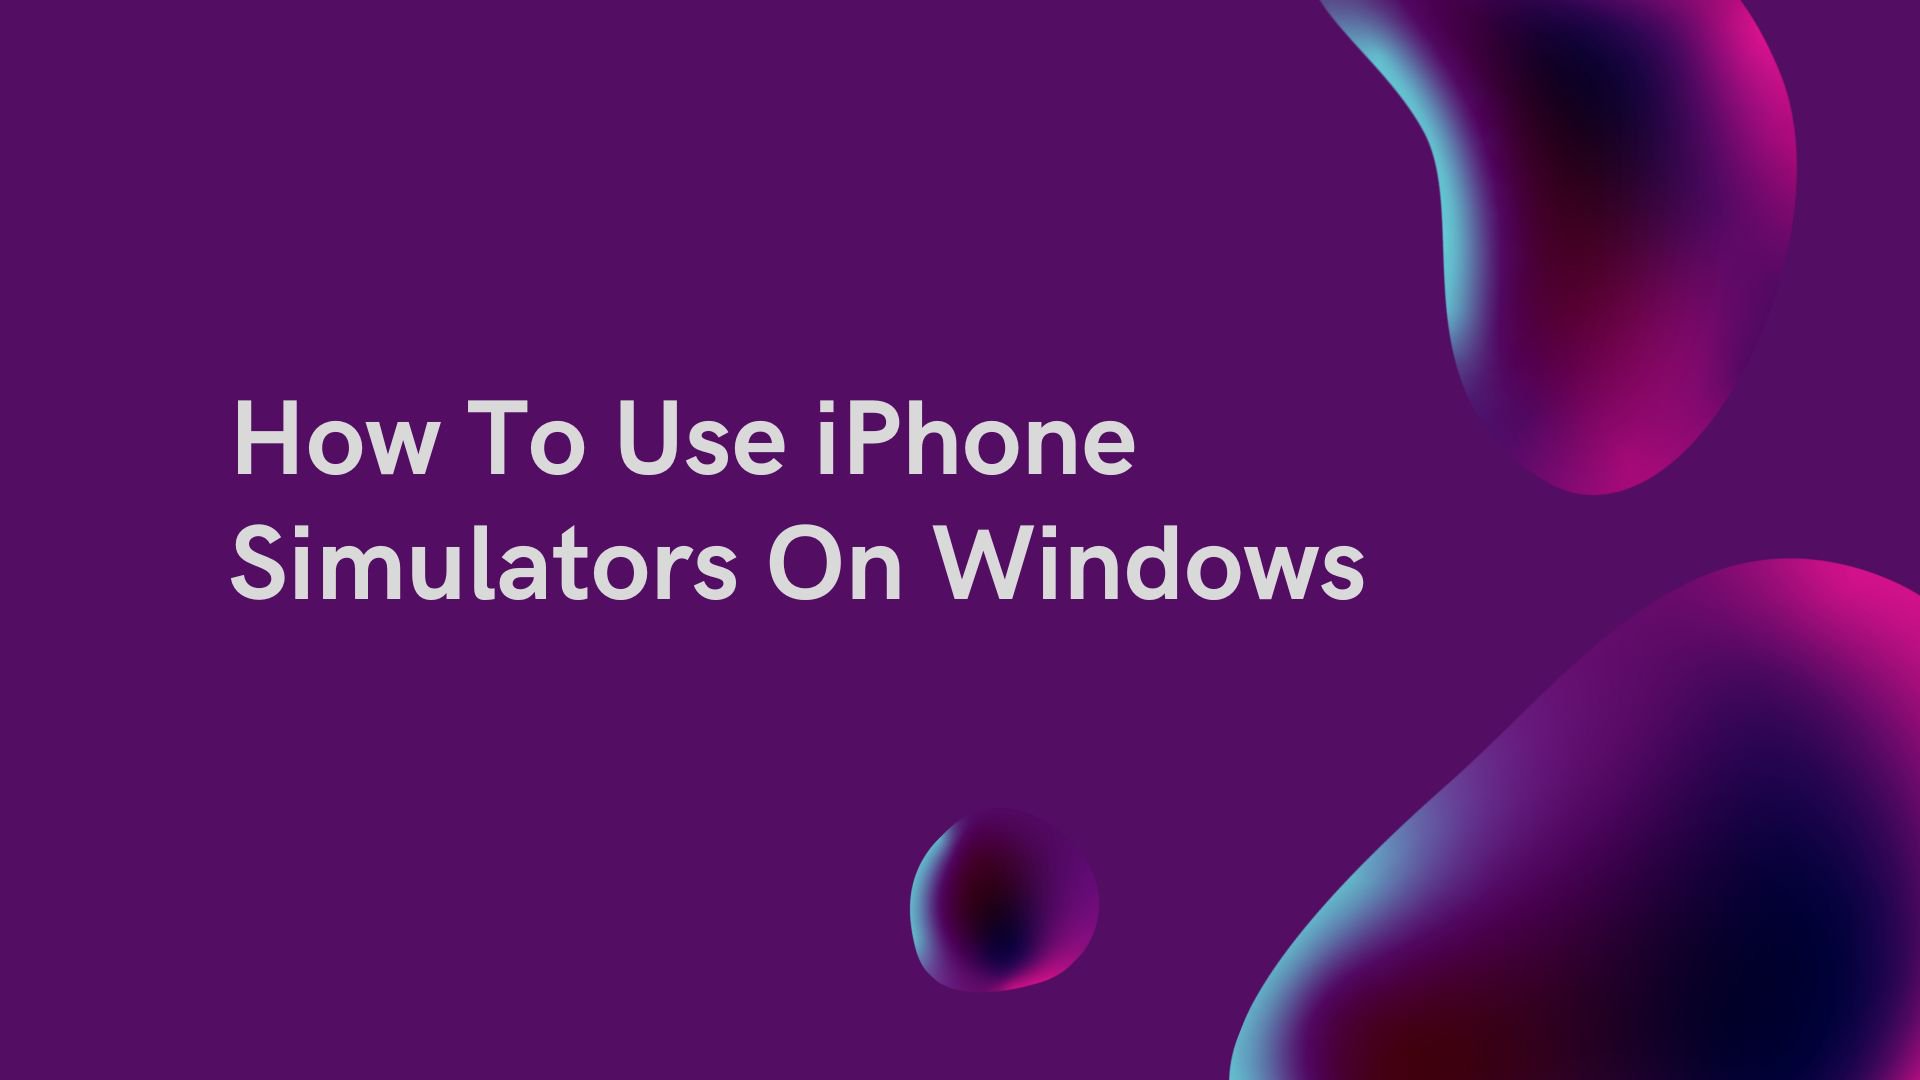 How To Use iPhone Simulators On Windows cover